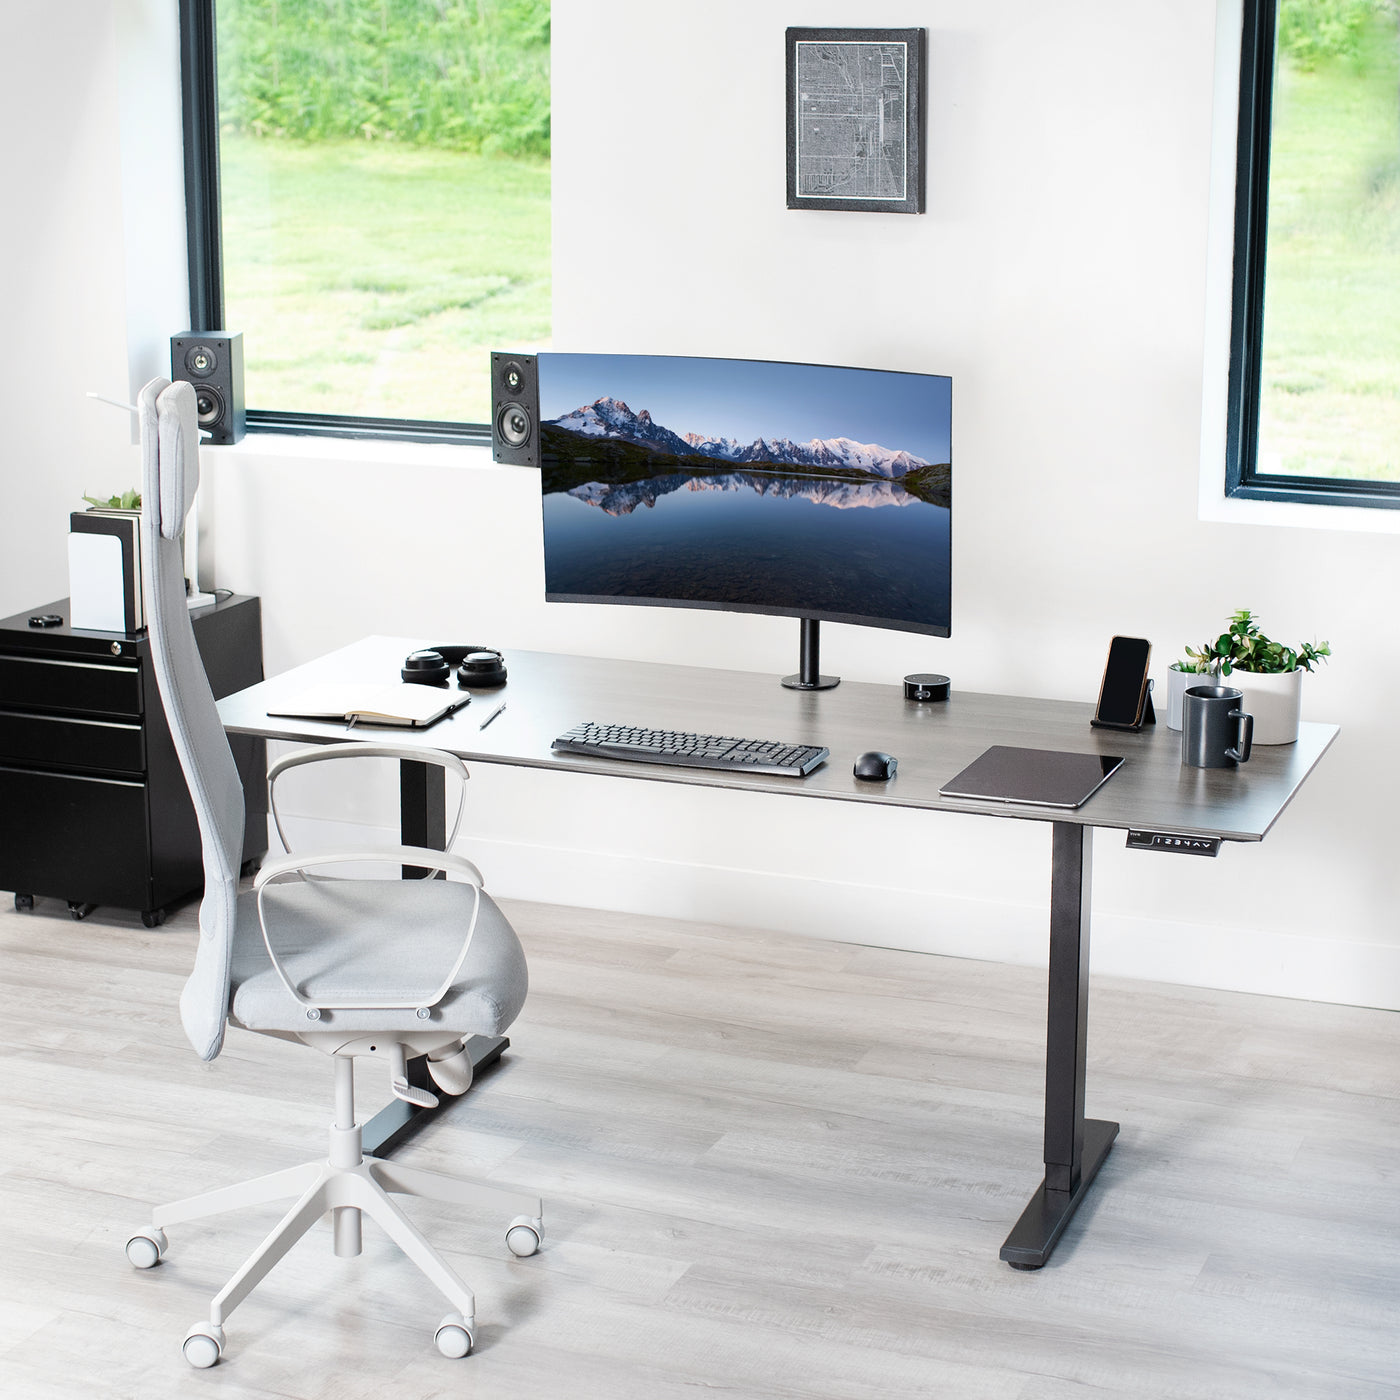 Monitor mount C-clamp desk mount in a modern workspace office setup.